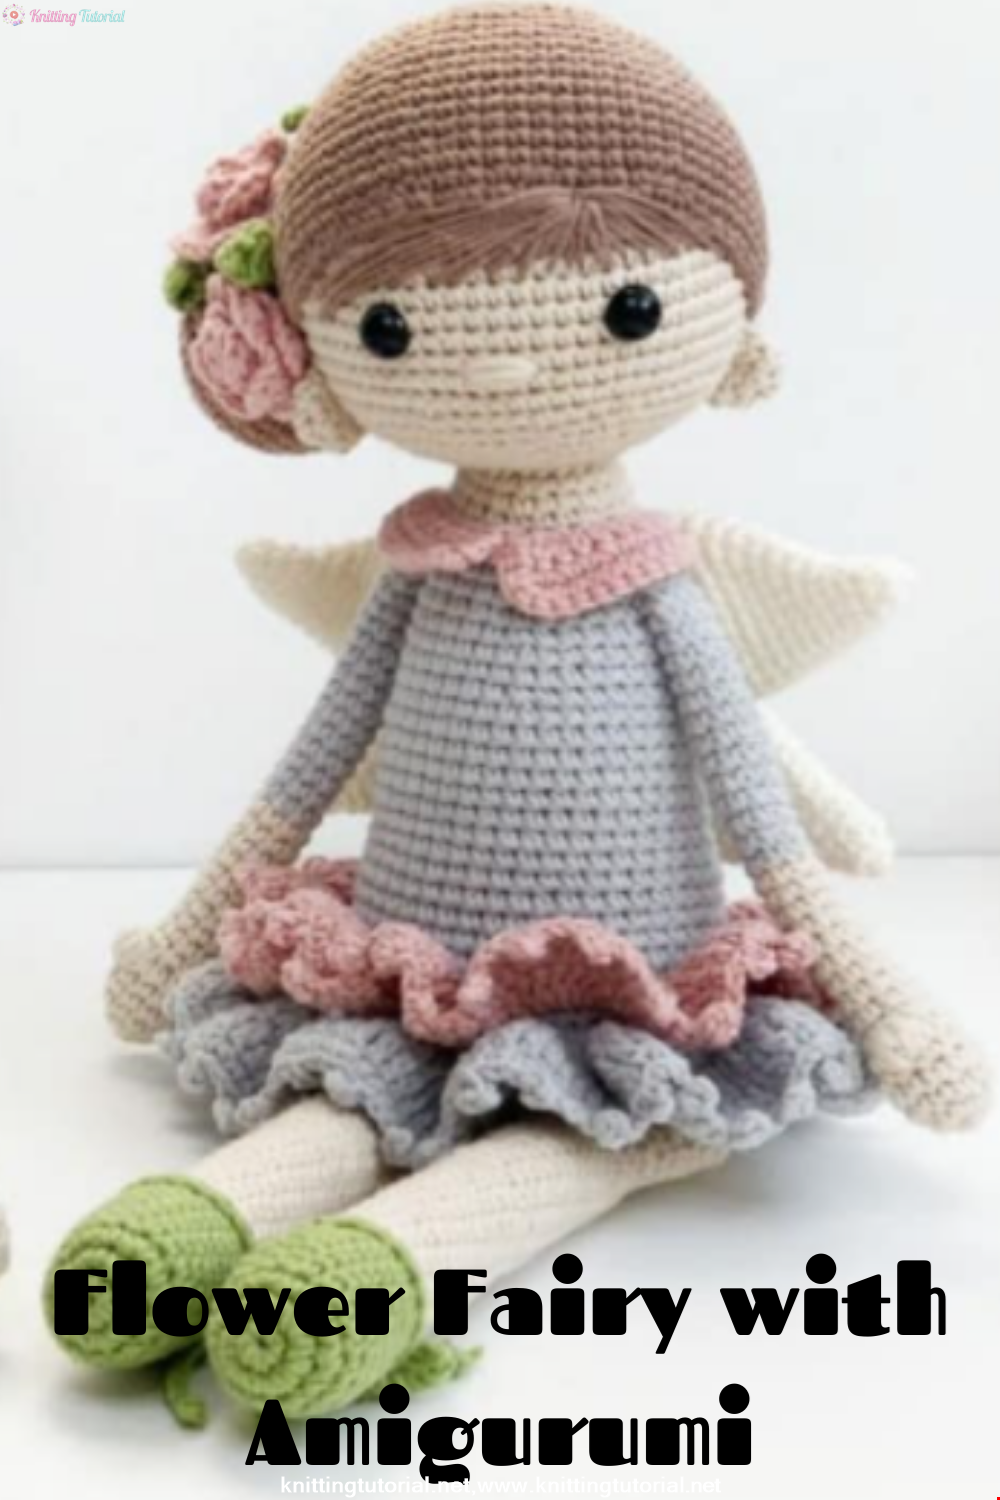 Flower Fairy Recipe and Making with Amigurumi